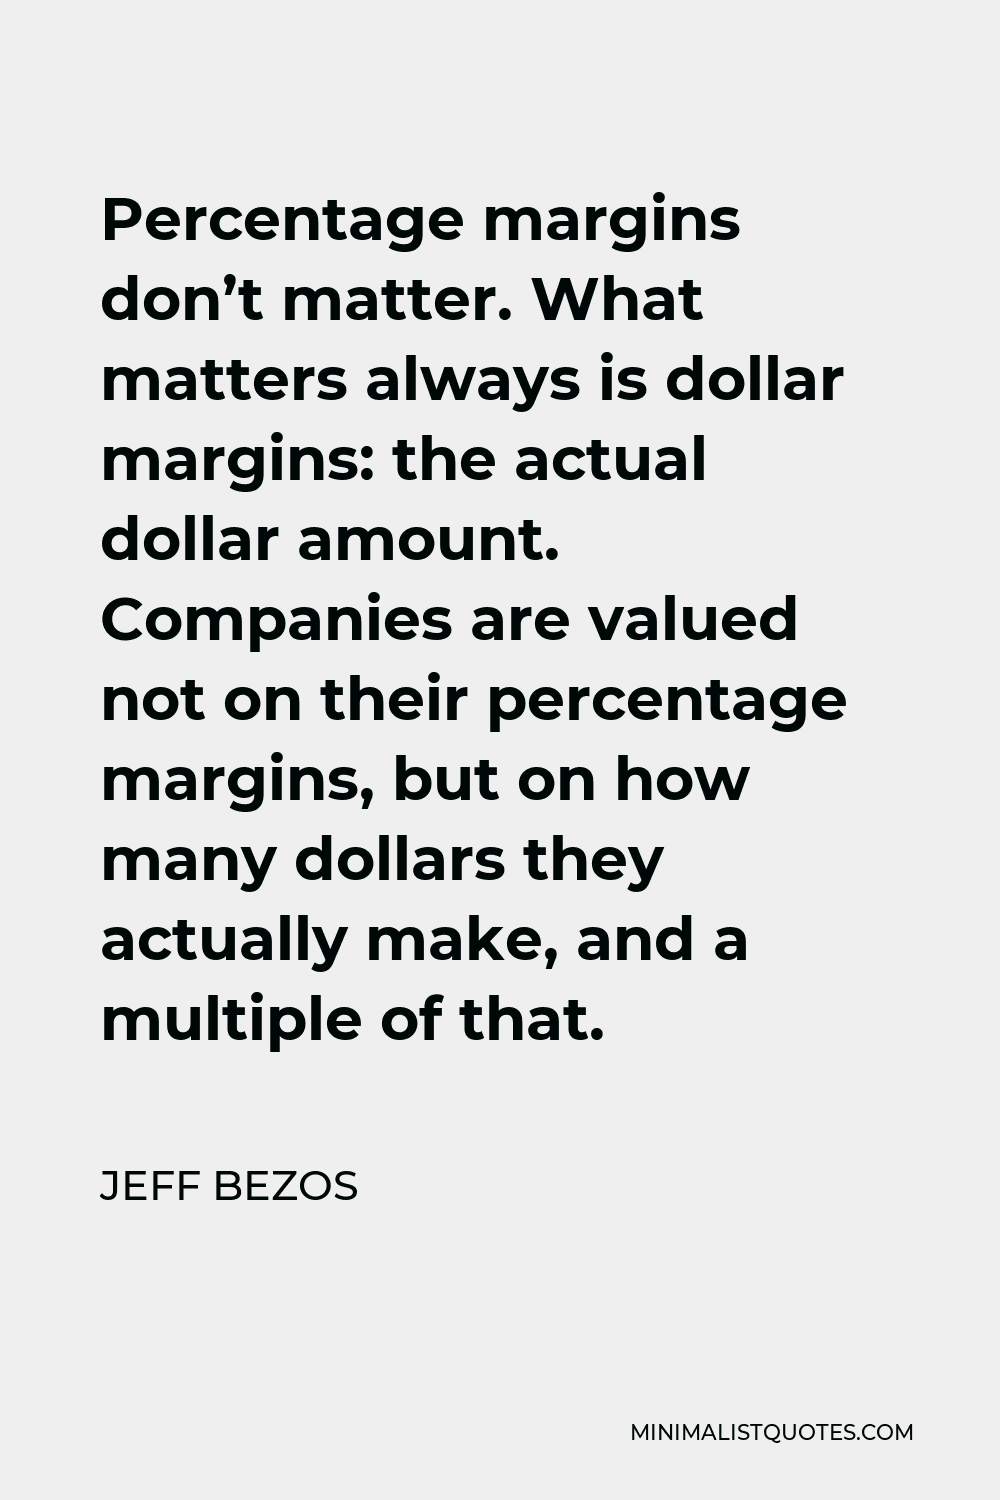 Jeff Bezos Quote - Percentage margins don’t matter. What matters always is dollar margins: the actual dollar amount. Companies are valued not on their percentage margins, but on how many dollars they actually make, and a multiple of that.